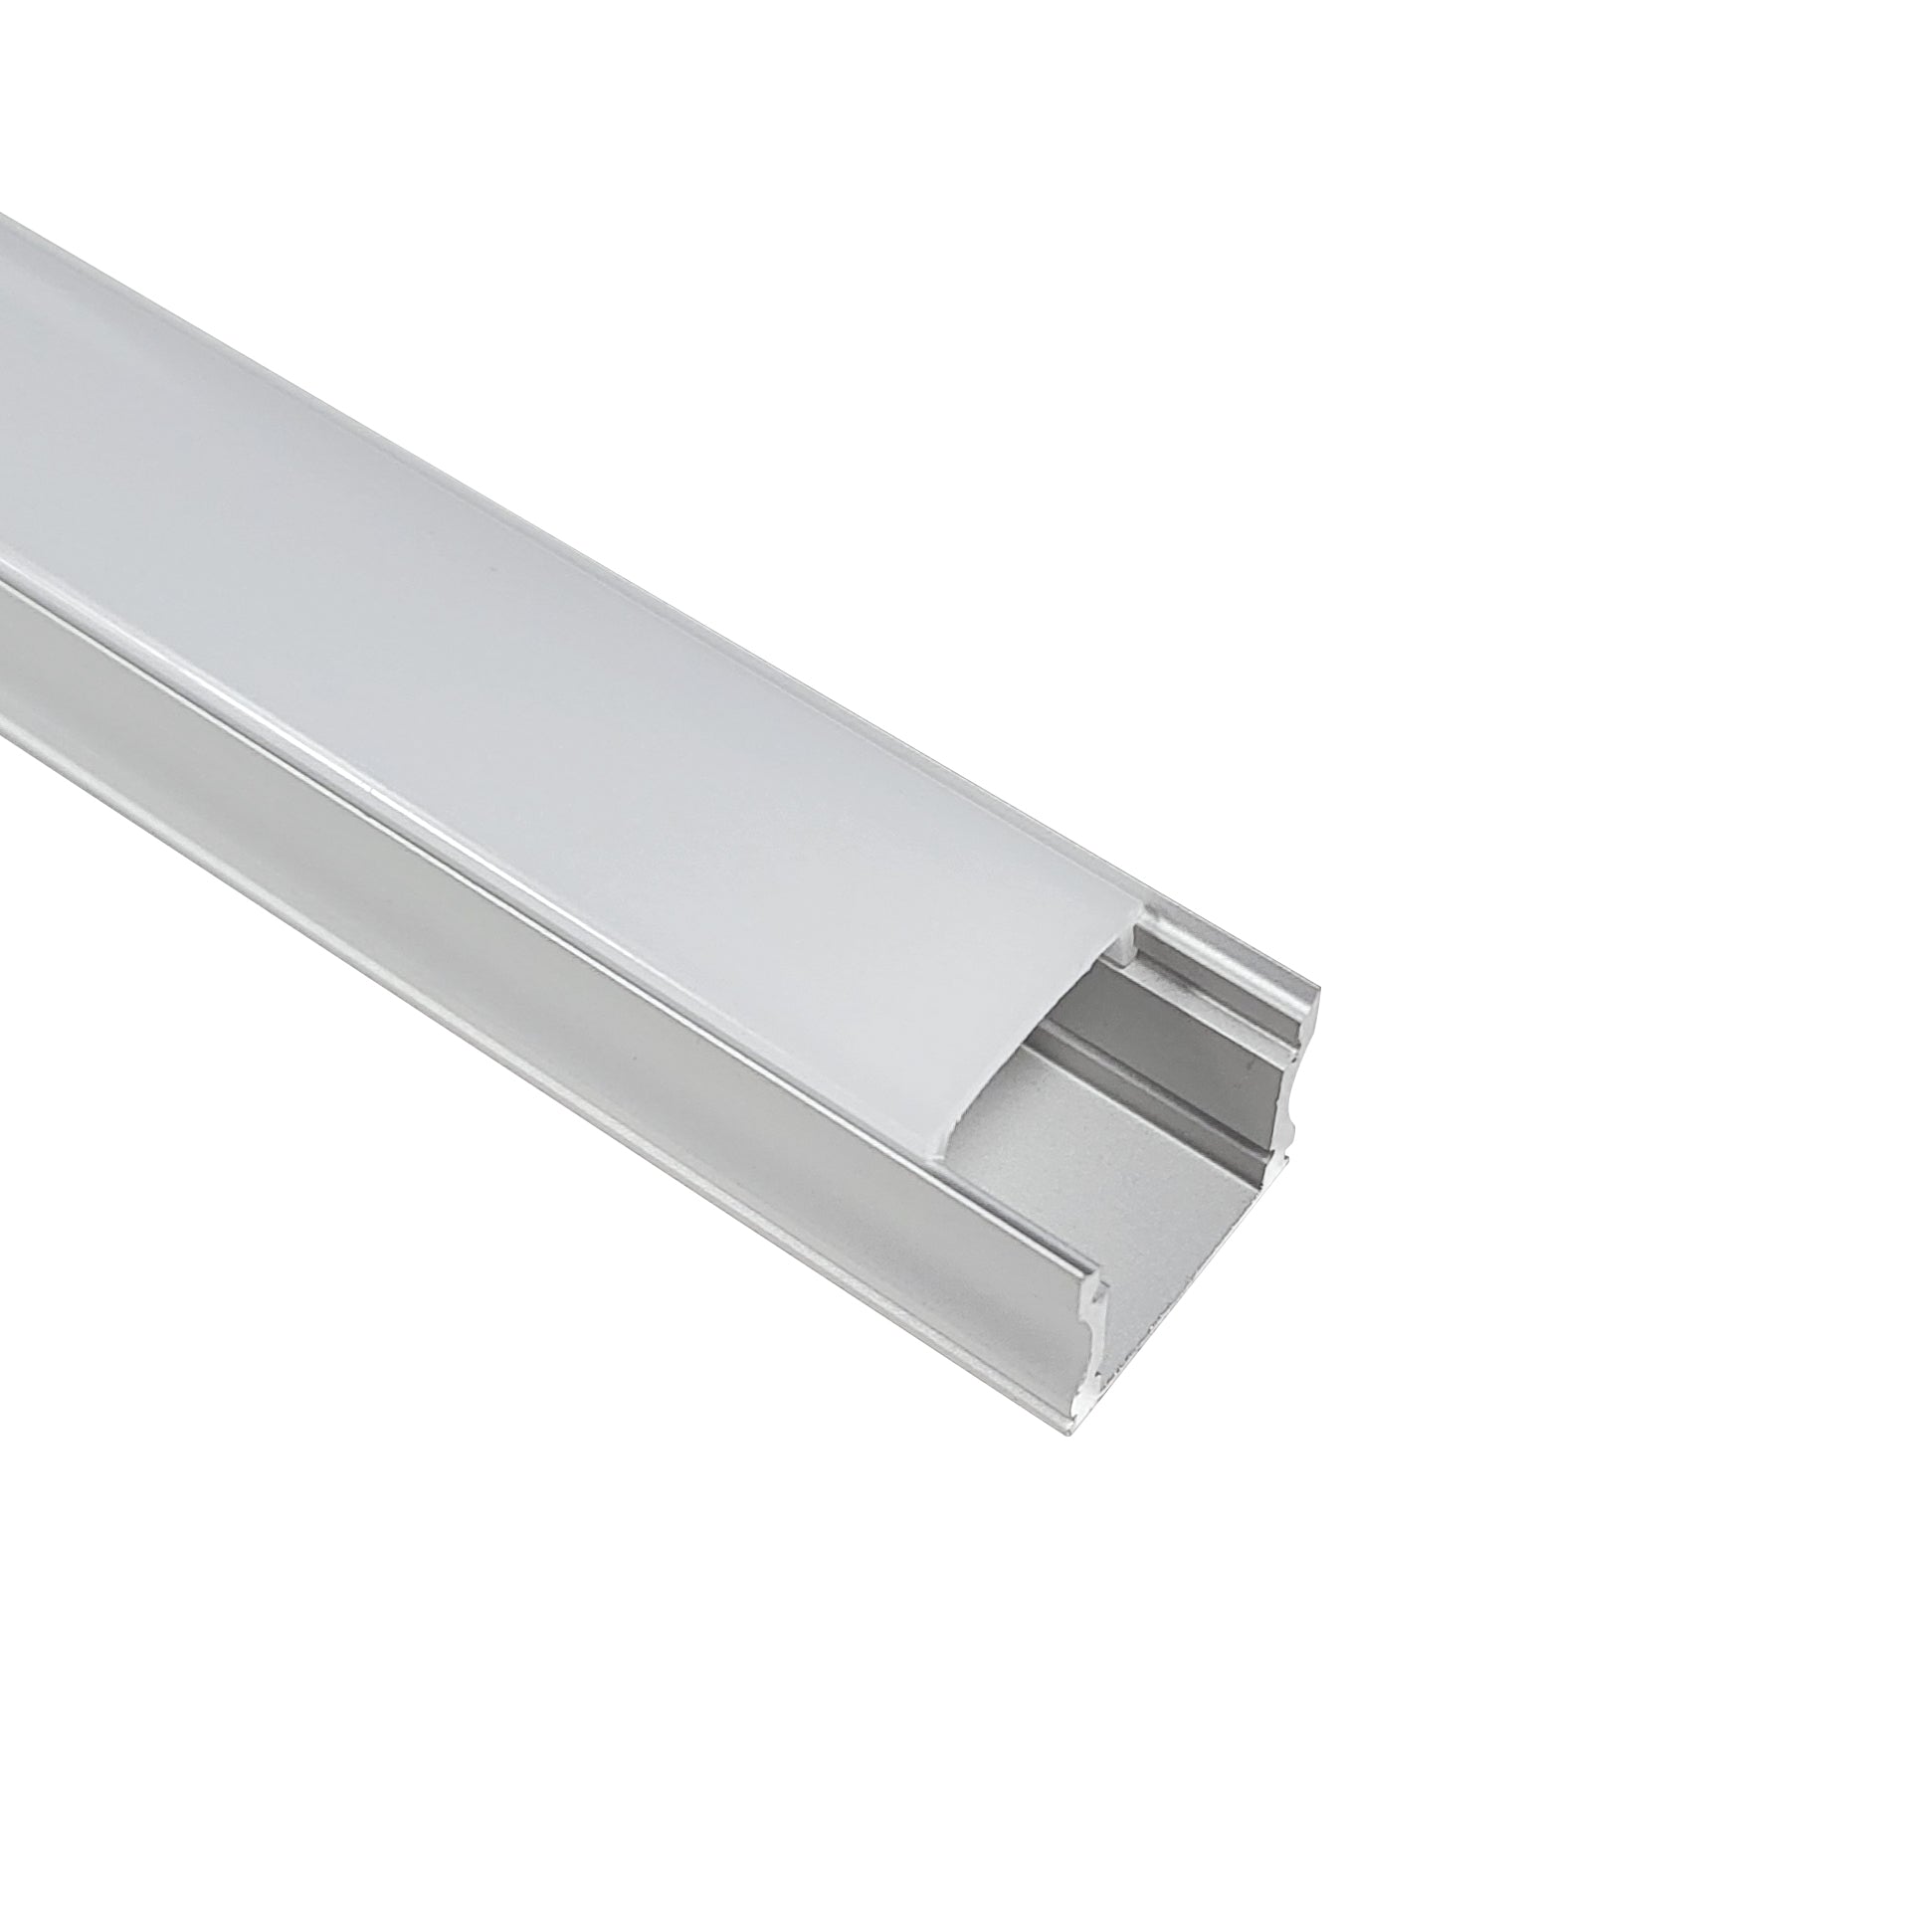 Nora Lighting NATL2-C26A 4' Deep Channel For NUTP14 - Aluminum